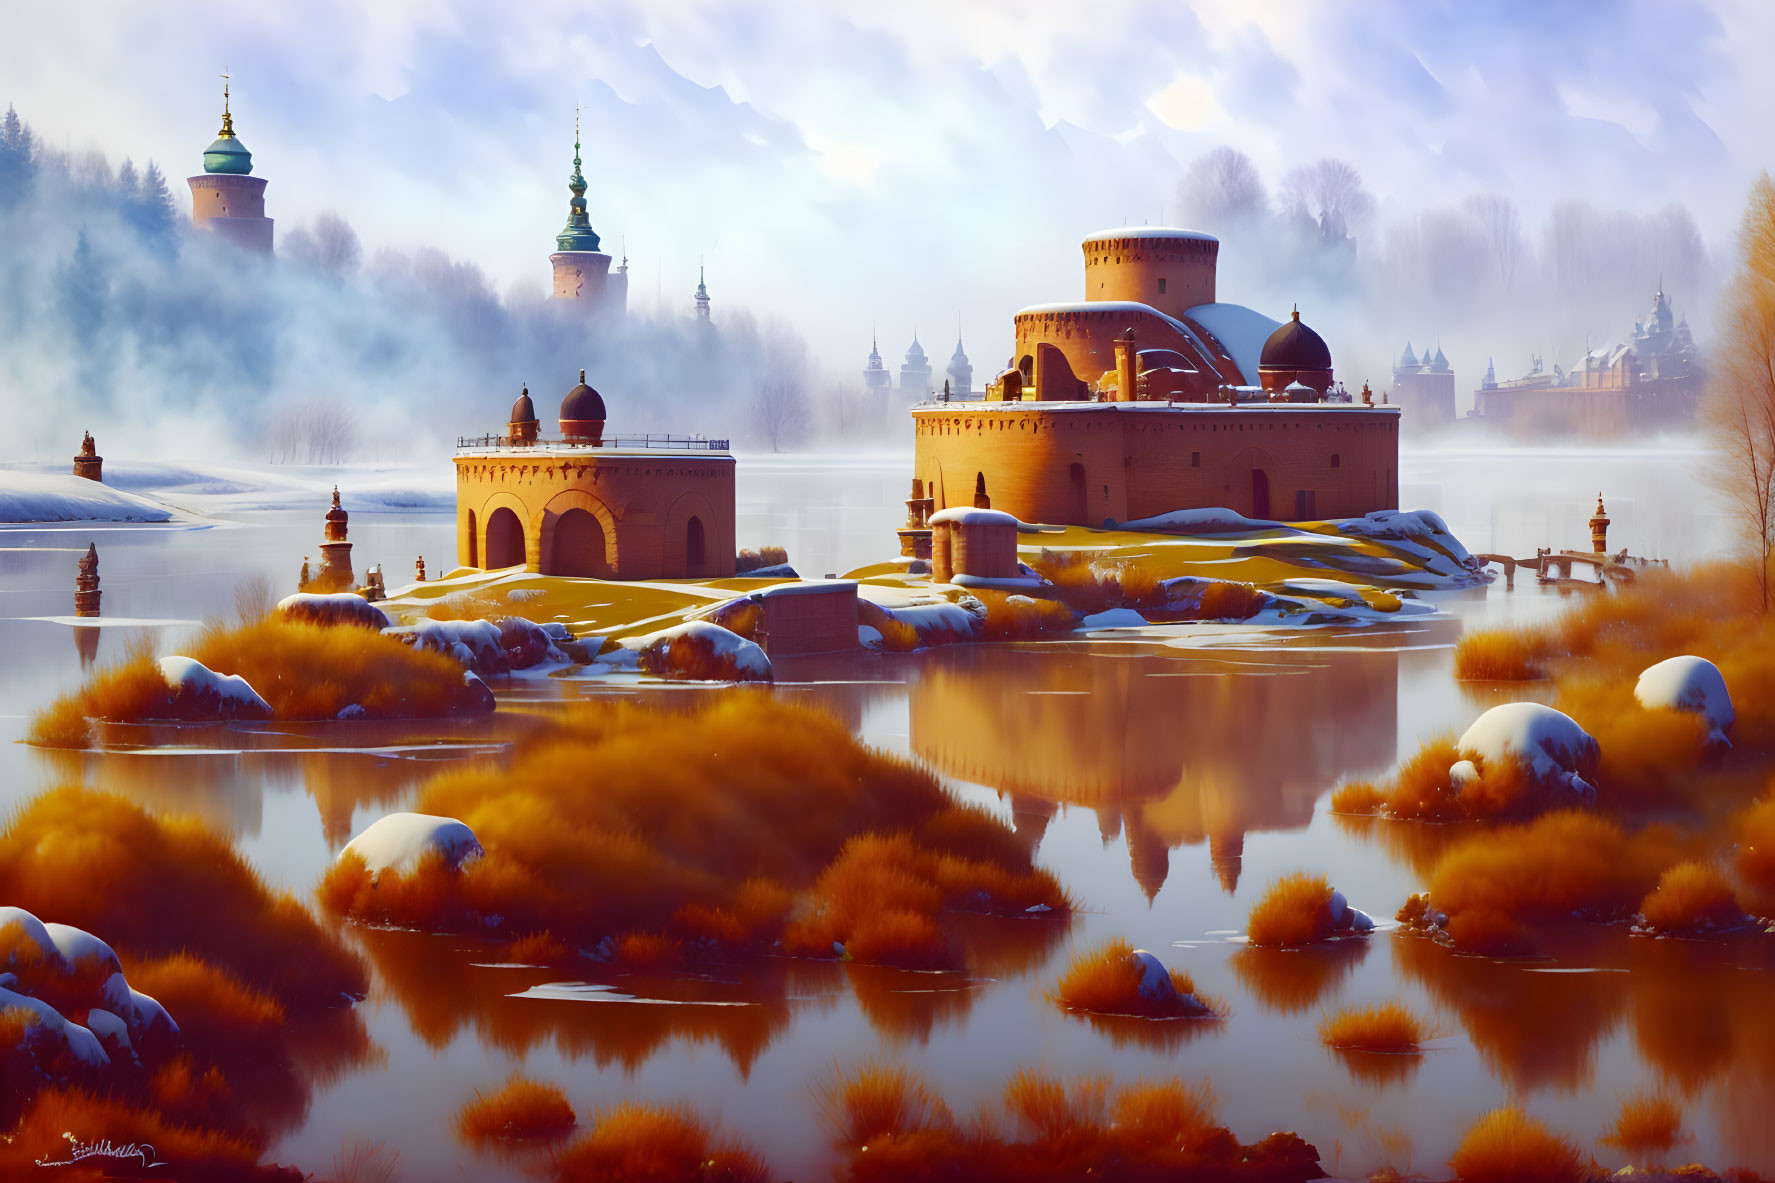 Tranquil fantasy landscape with reflective lake, golden foliage, snow, medieval buildings, and misty